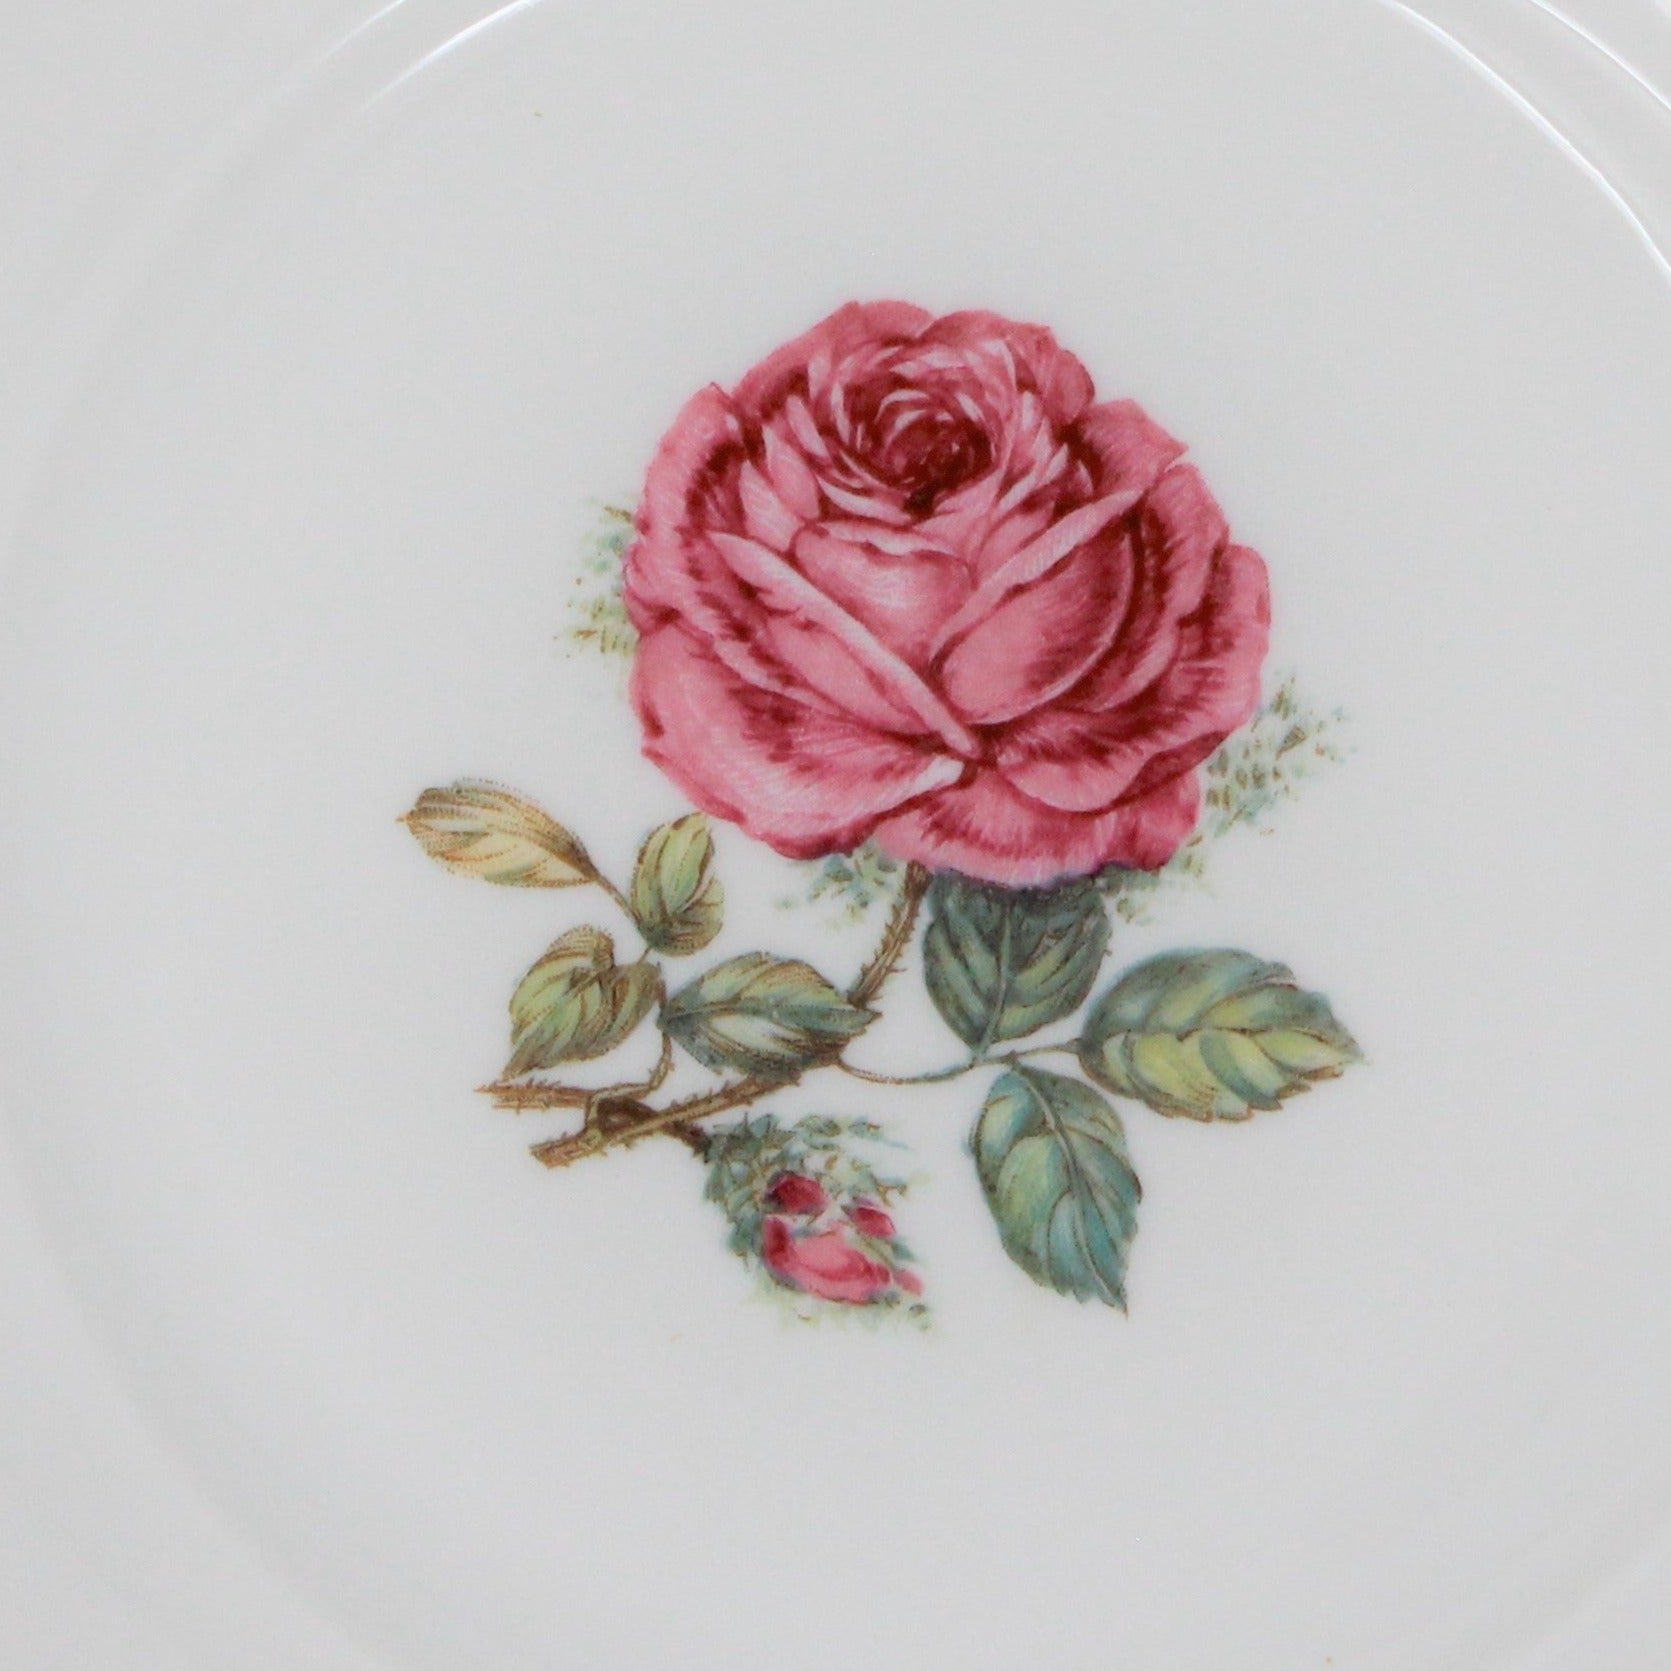 The Dundee pattern, large pink rose